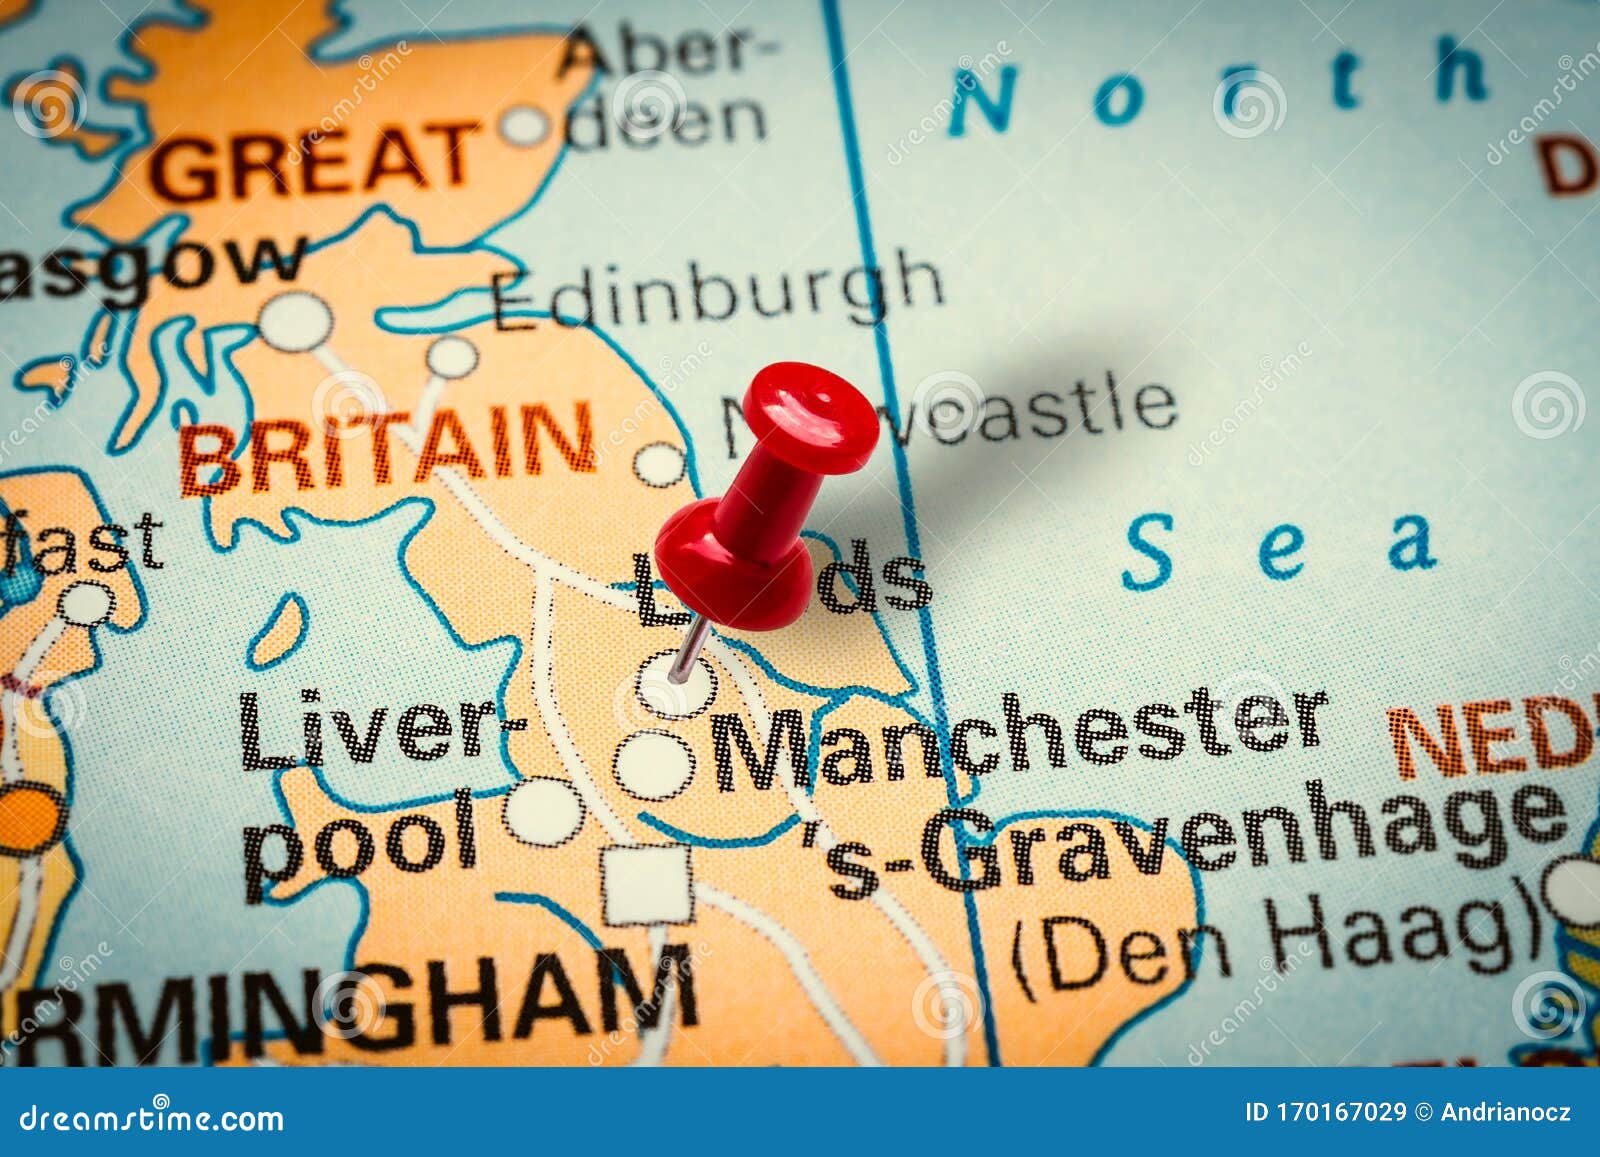 pushpin pointing at leeds city in united kingdom